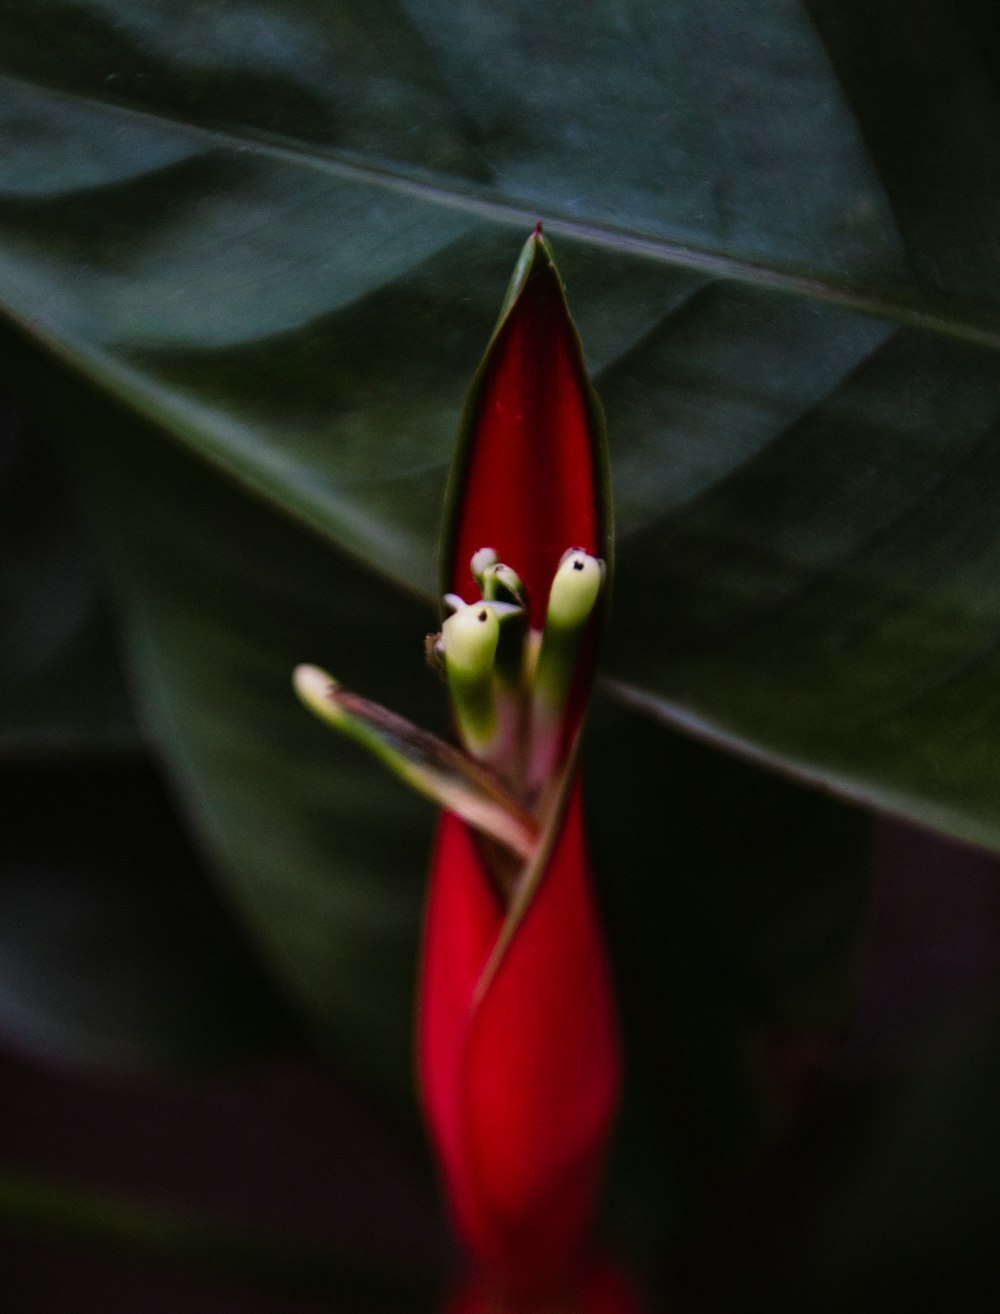 a close up of a red flower with green leaves